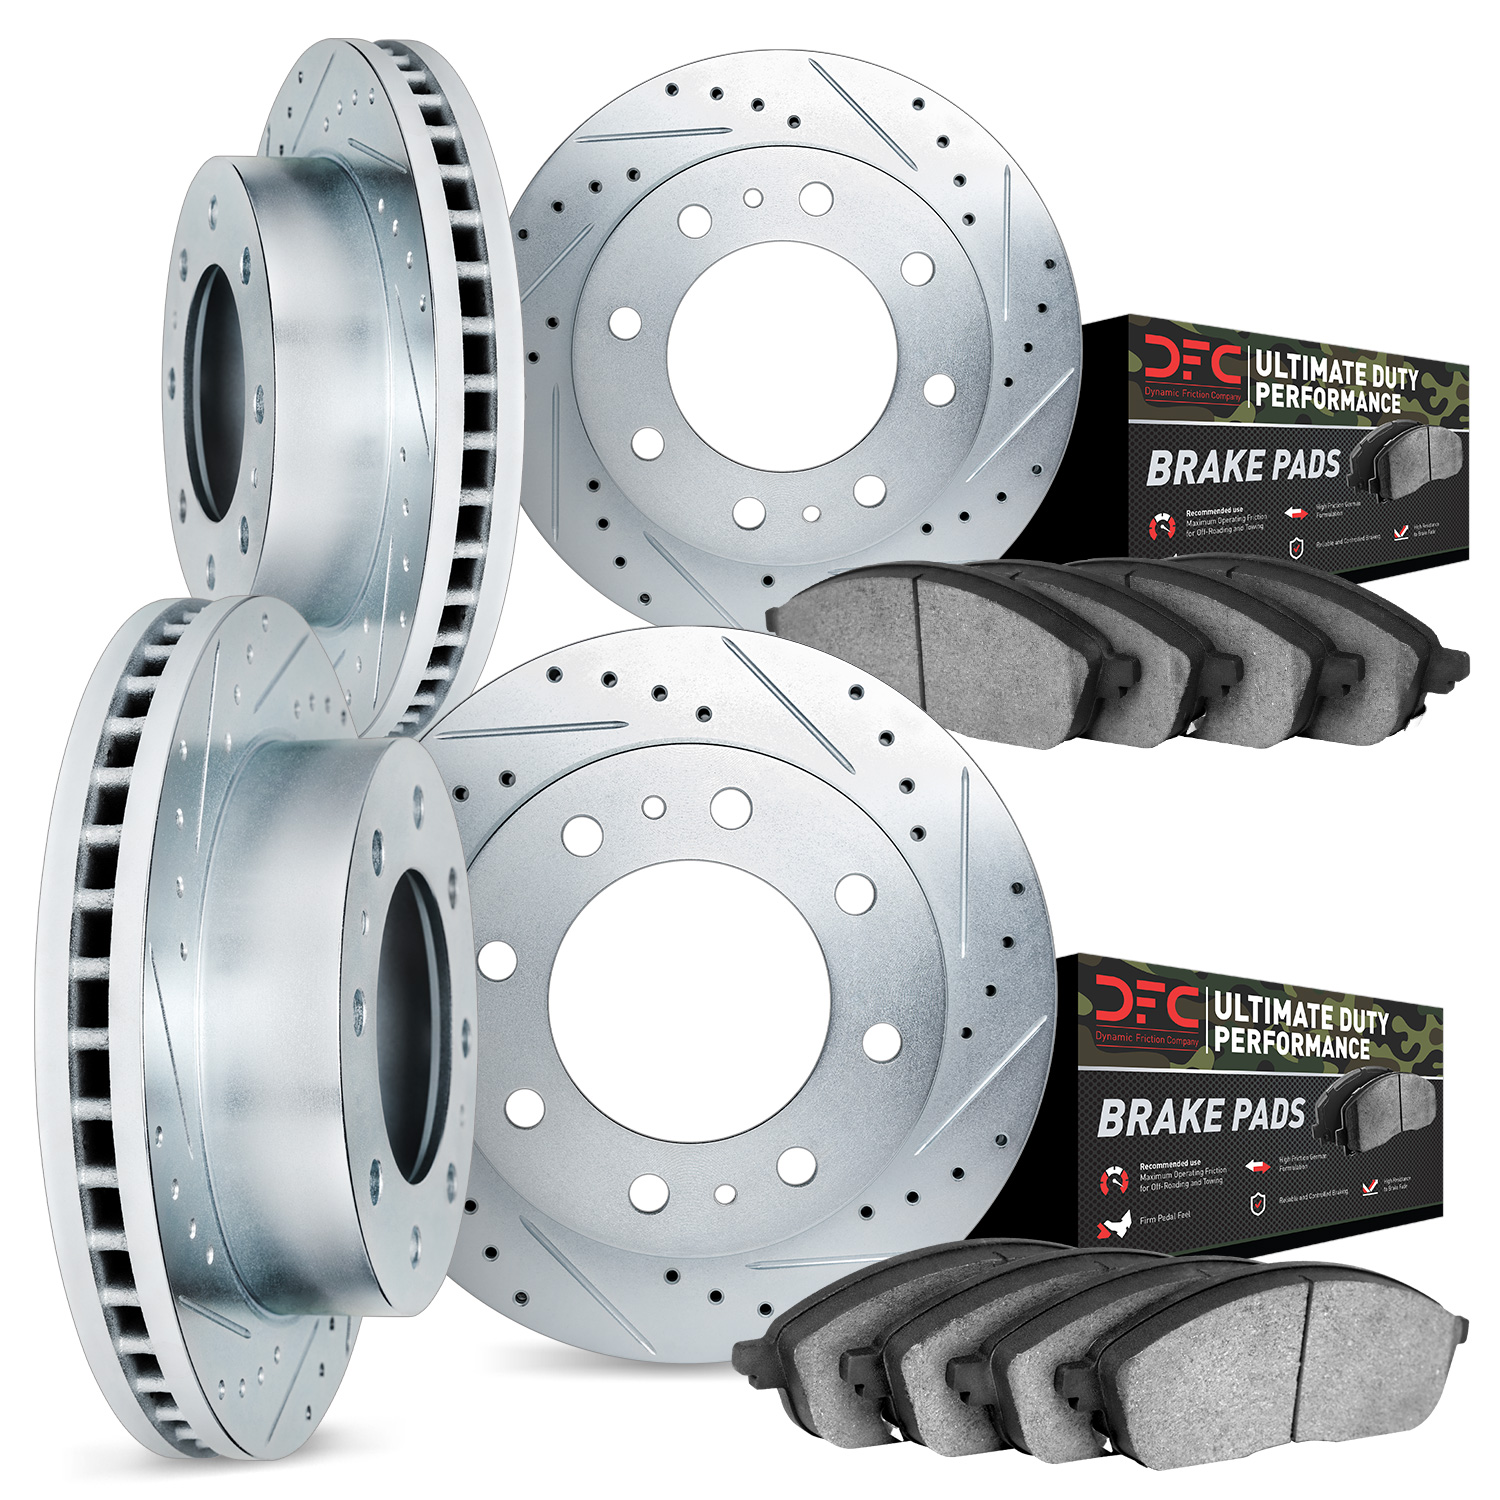 7404-40007 Drilled/Slotted Brake Rotors with Ultimate-Duty Brake Pads Kit [Silver], 2009-2018 Mopar, Position: Front and Rear